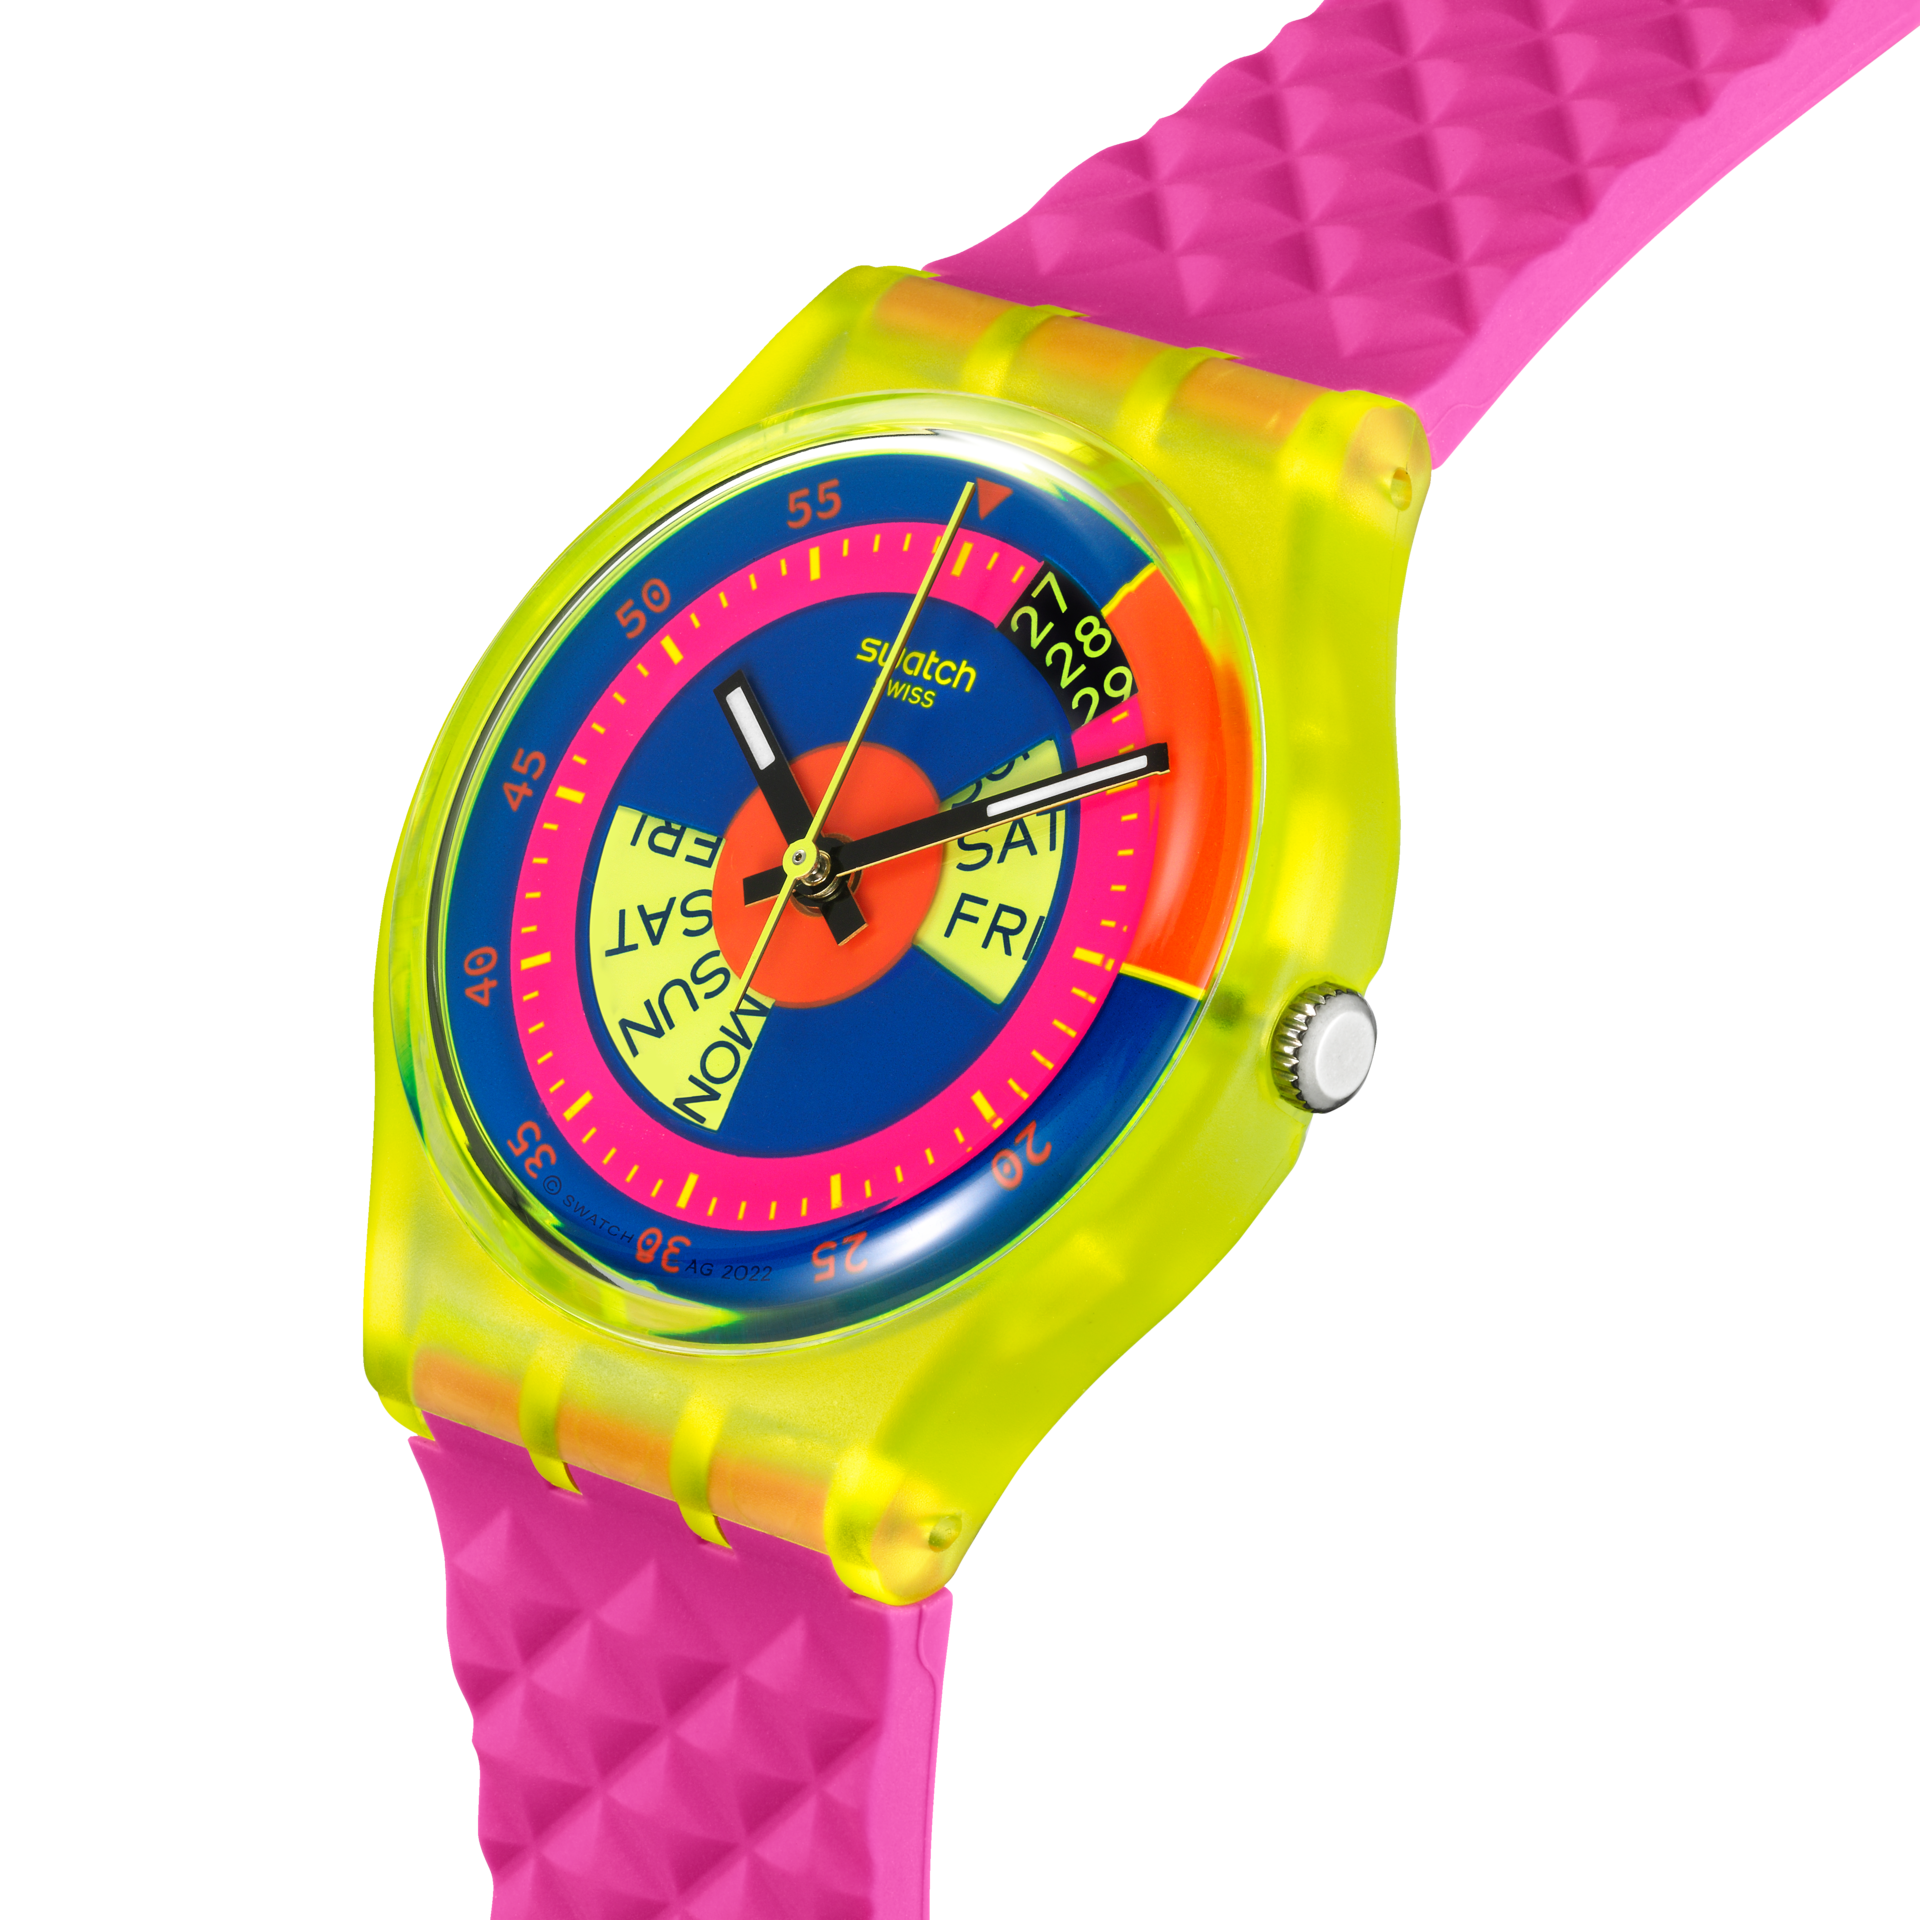 "SWATCH SHADES OF NEON" Gallery Image #2